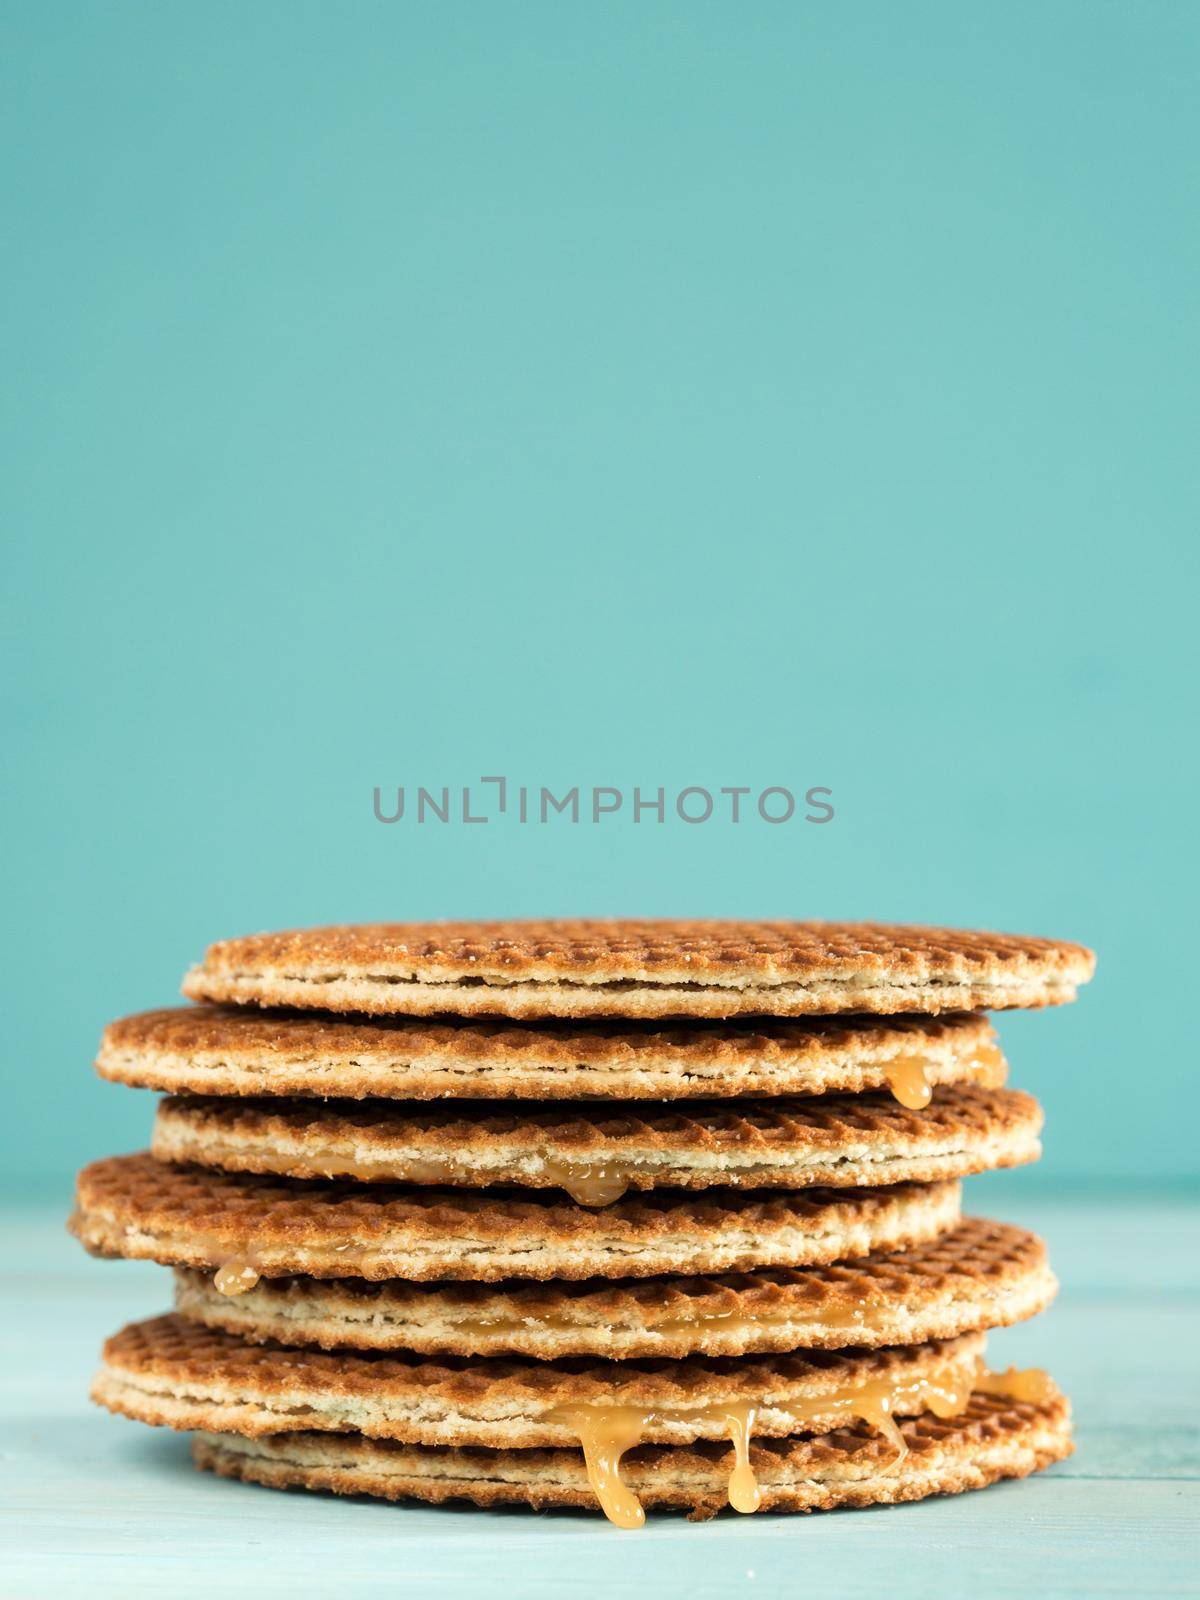 Stroopwafels or caramel Dutch Waffle close up on turquoise wooden background